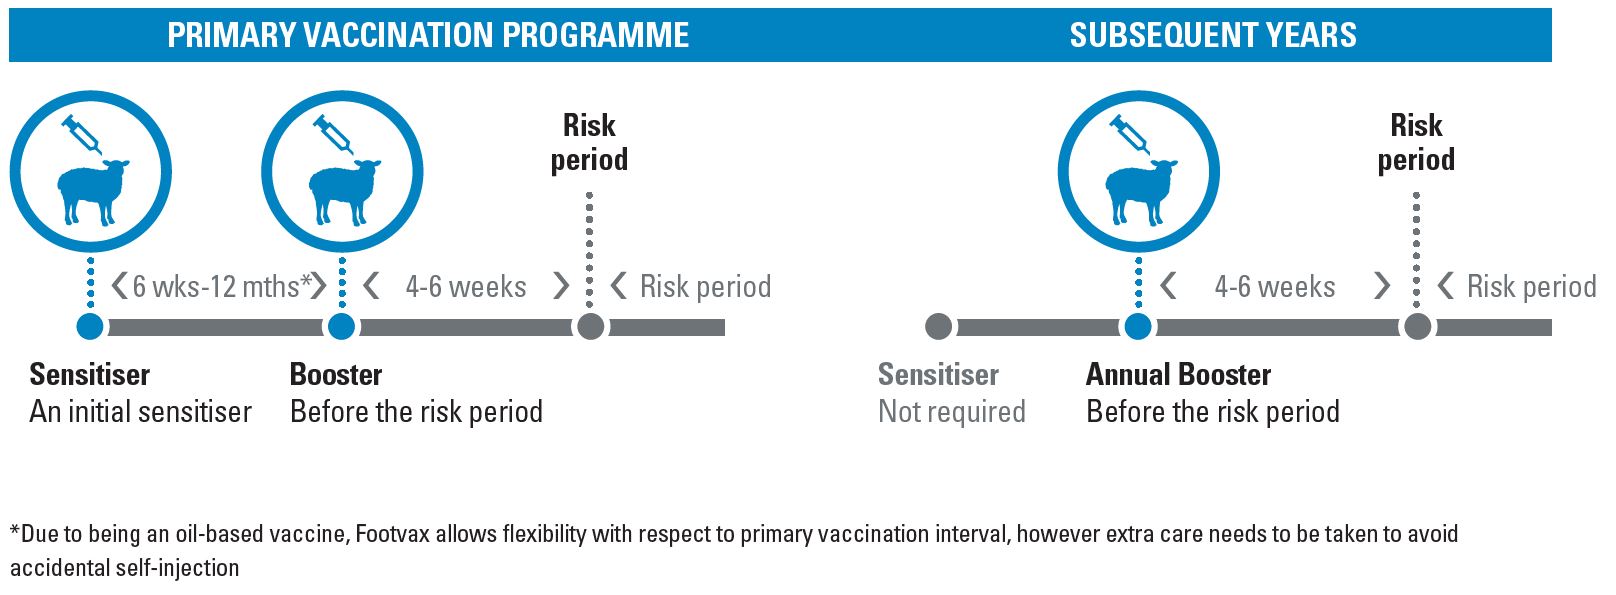 Recommended vaccination programme for Footvax